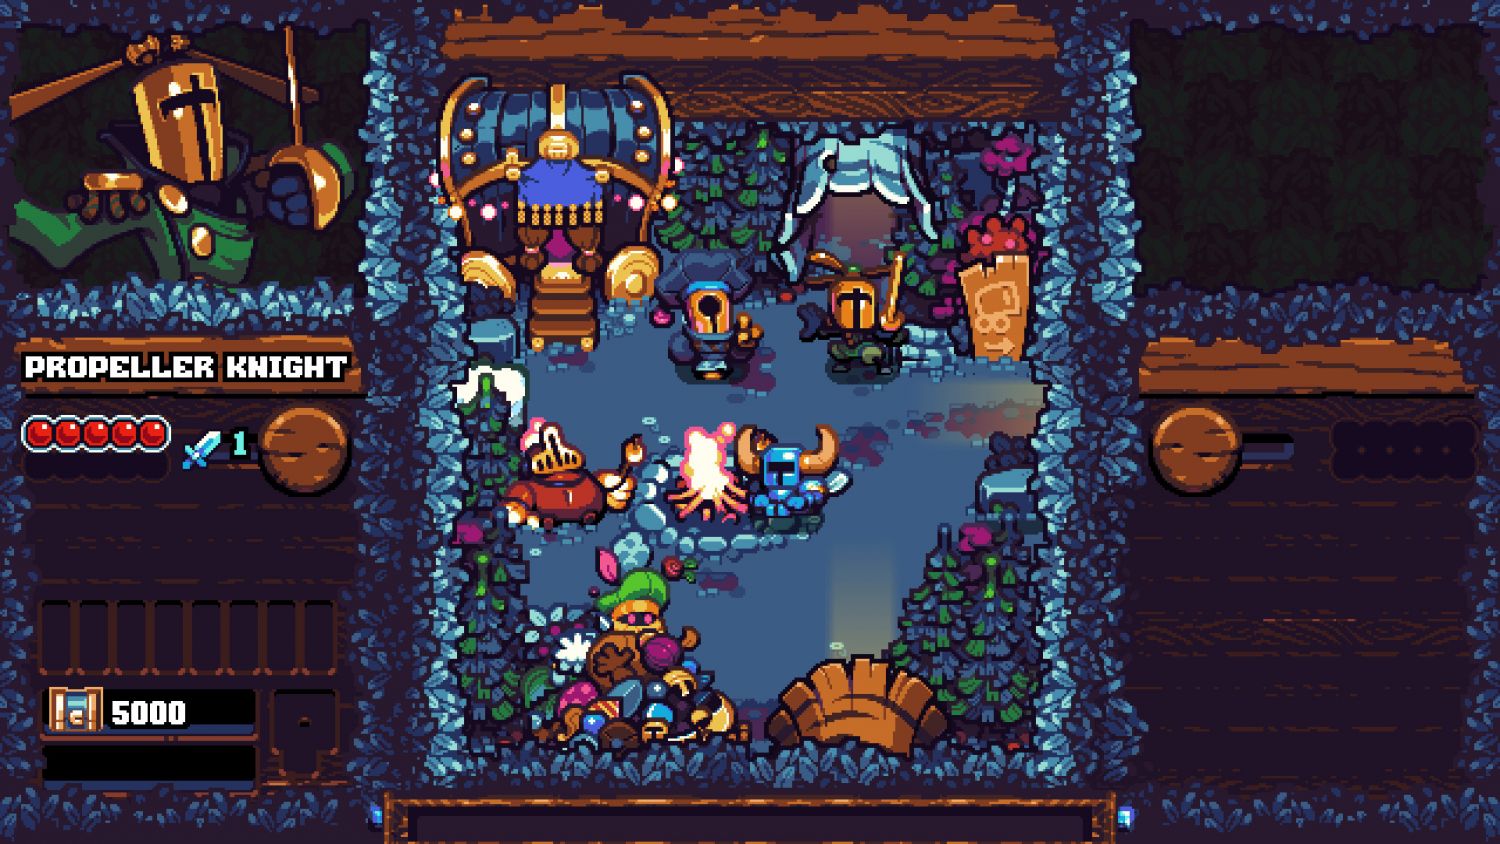 The Order of No Quarter awaits in Shovel Knight: Pocket Dungeon